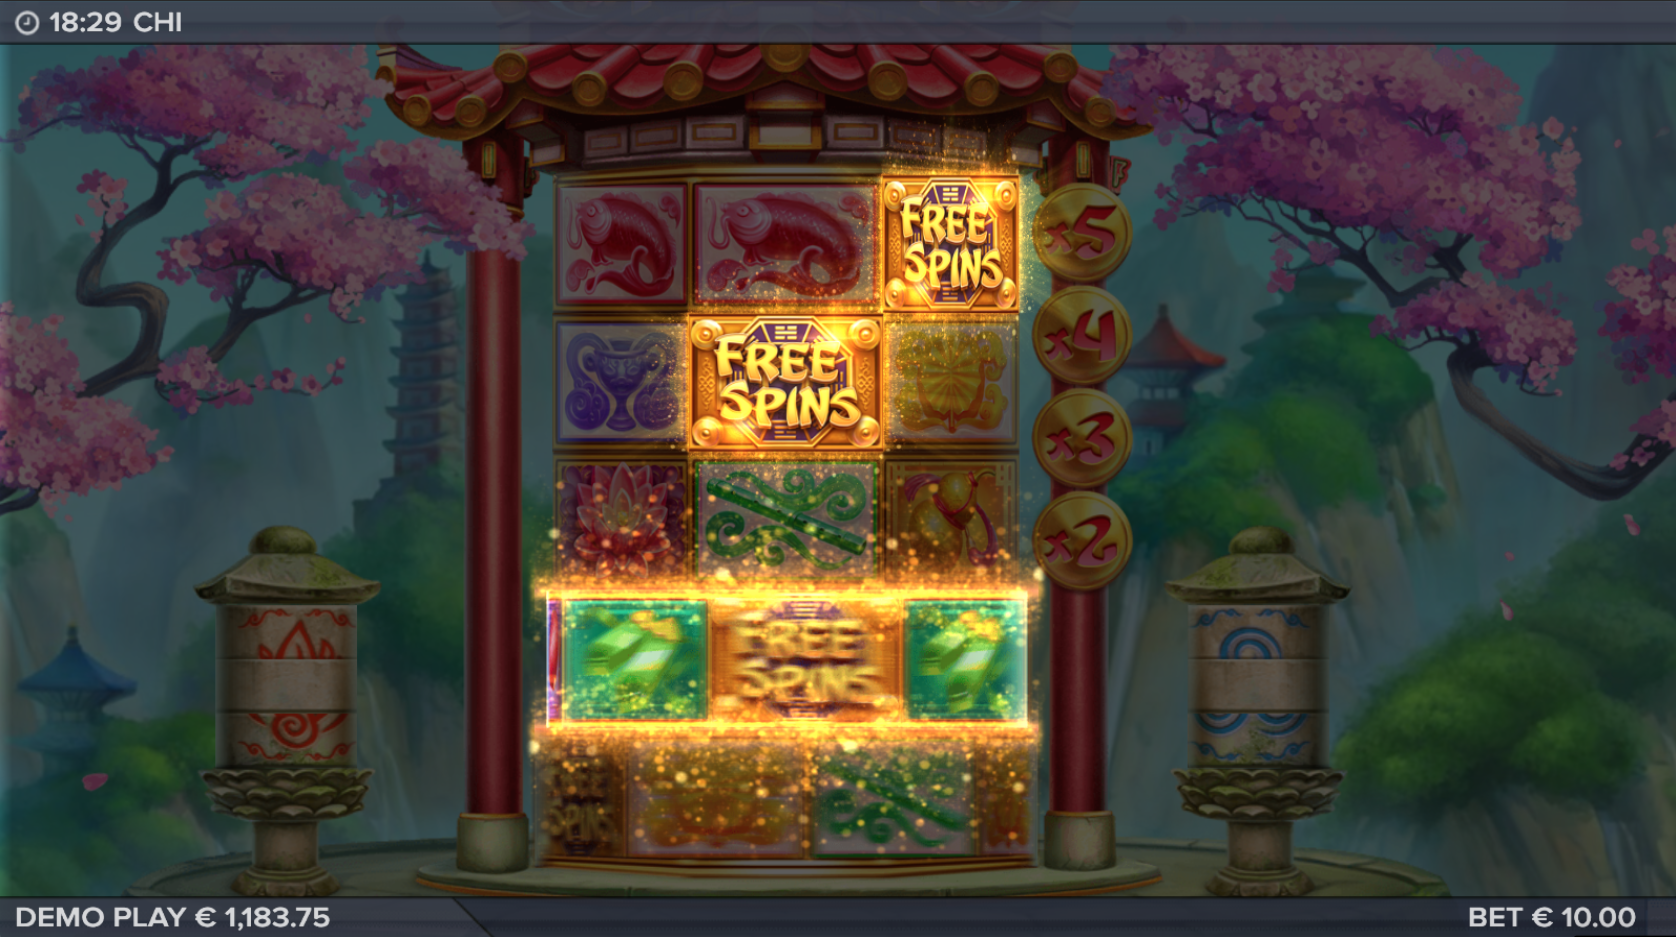 Free spins 